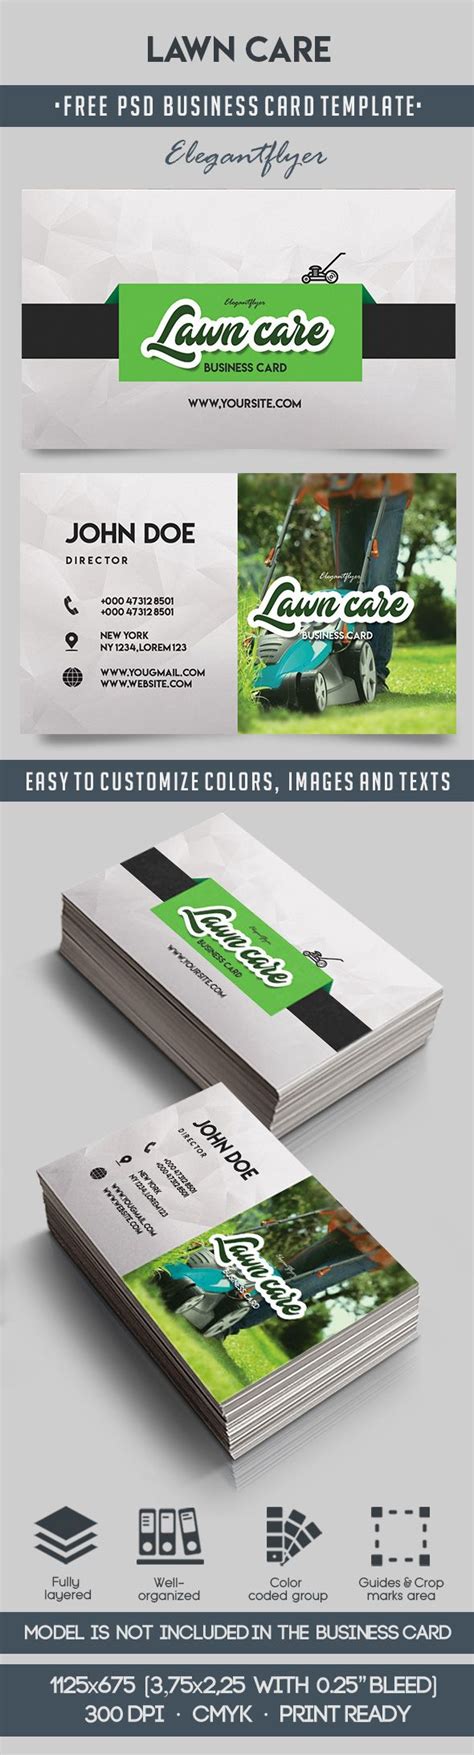 For example, vertical,horizontal, round edged or cornered. Lawn Care - Free Business Card Templates PSD - by ElegantFlyer